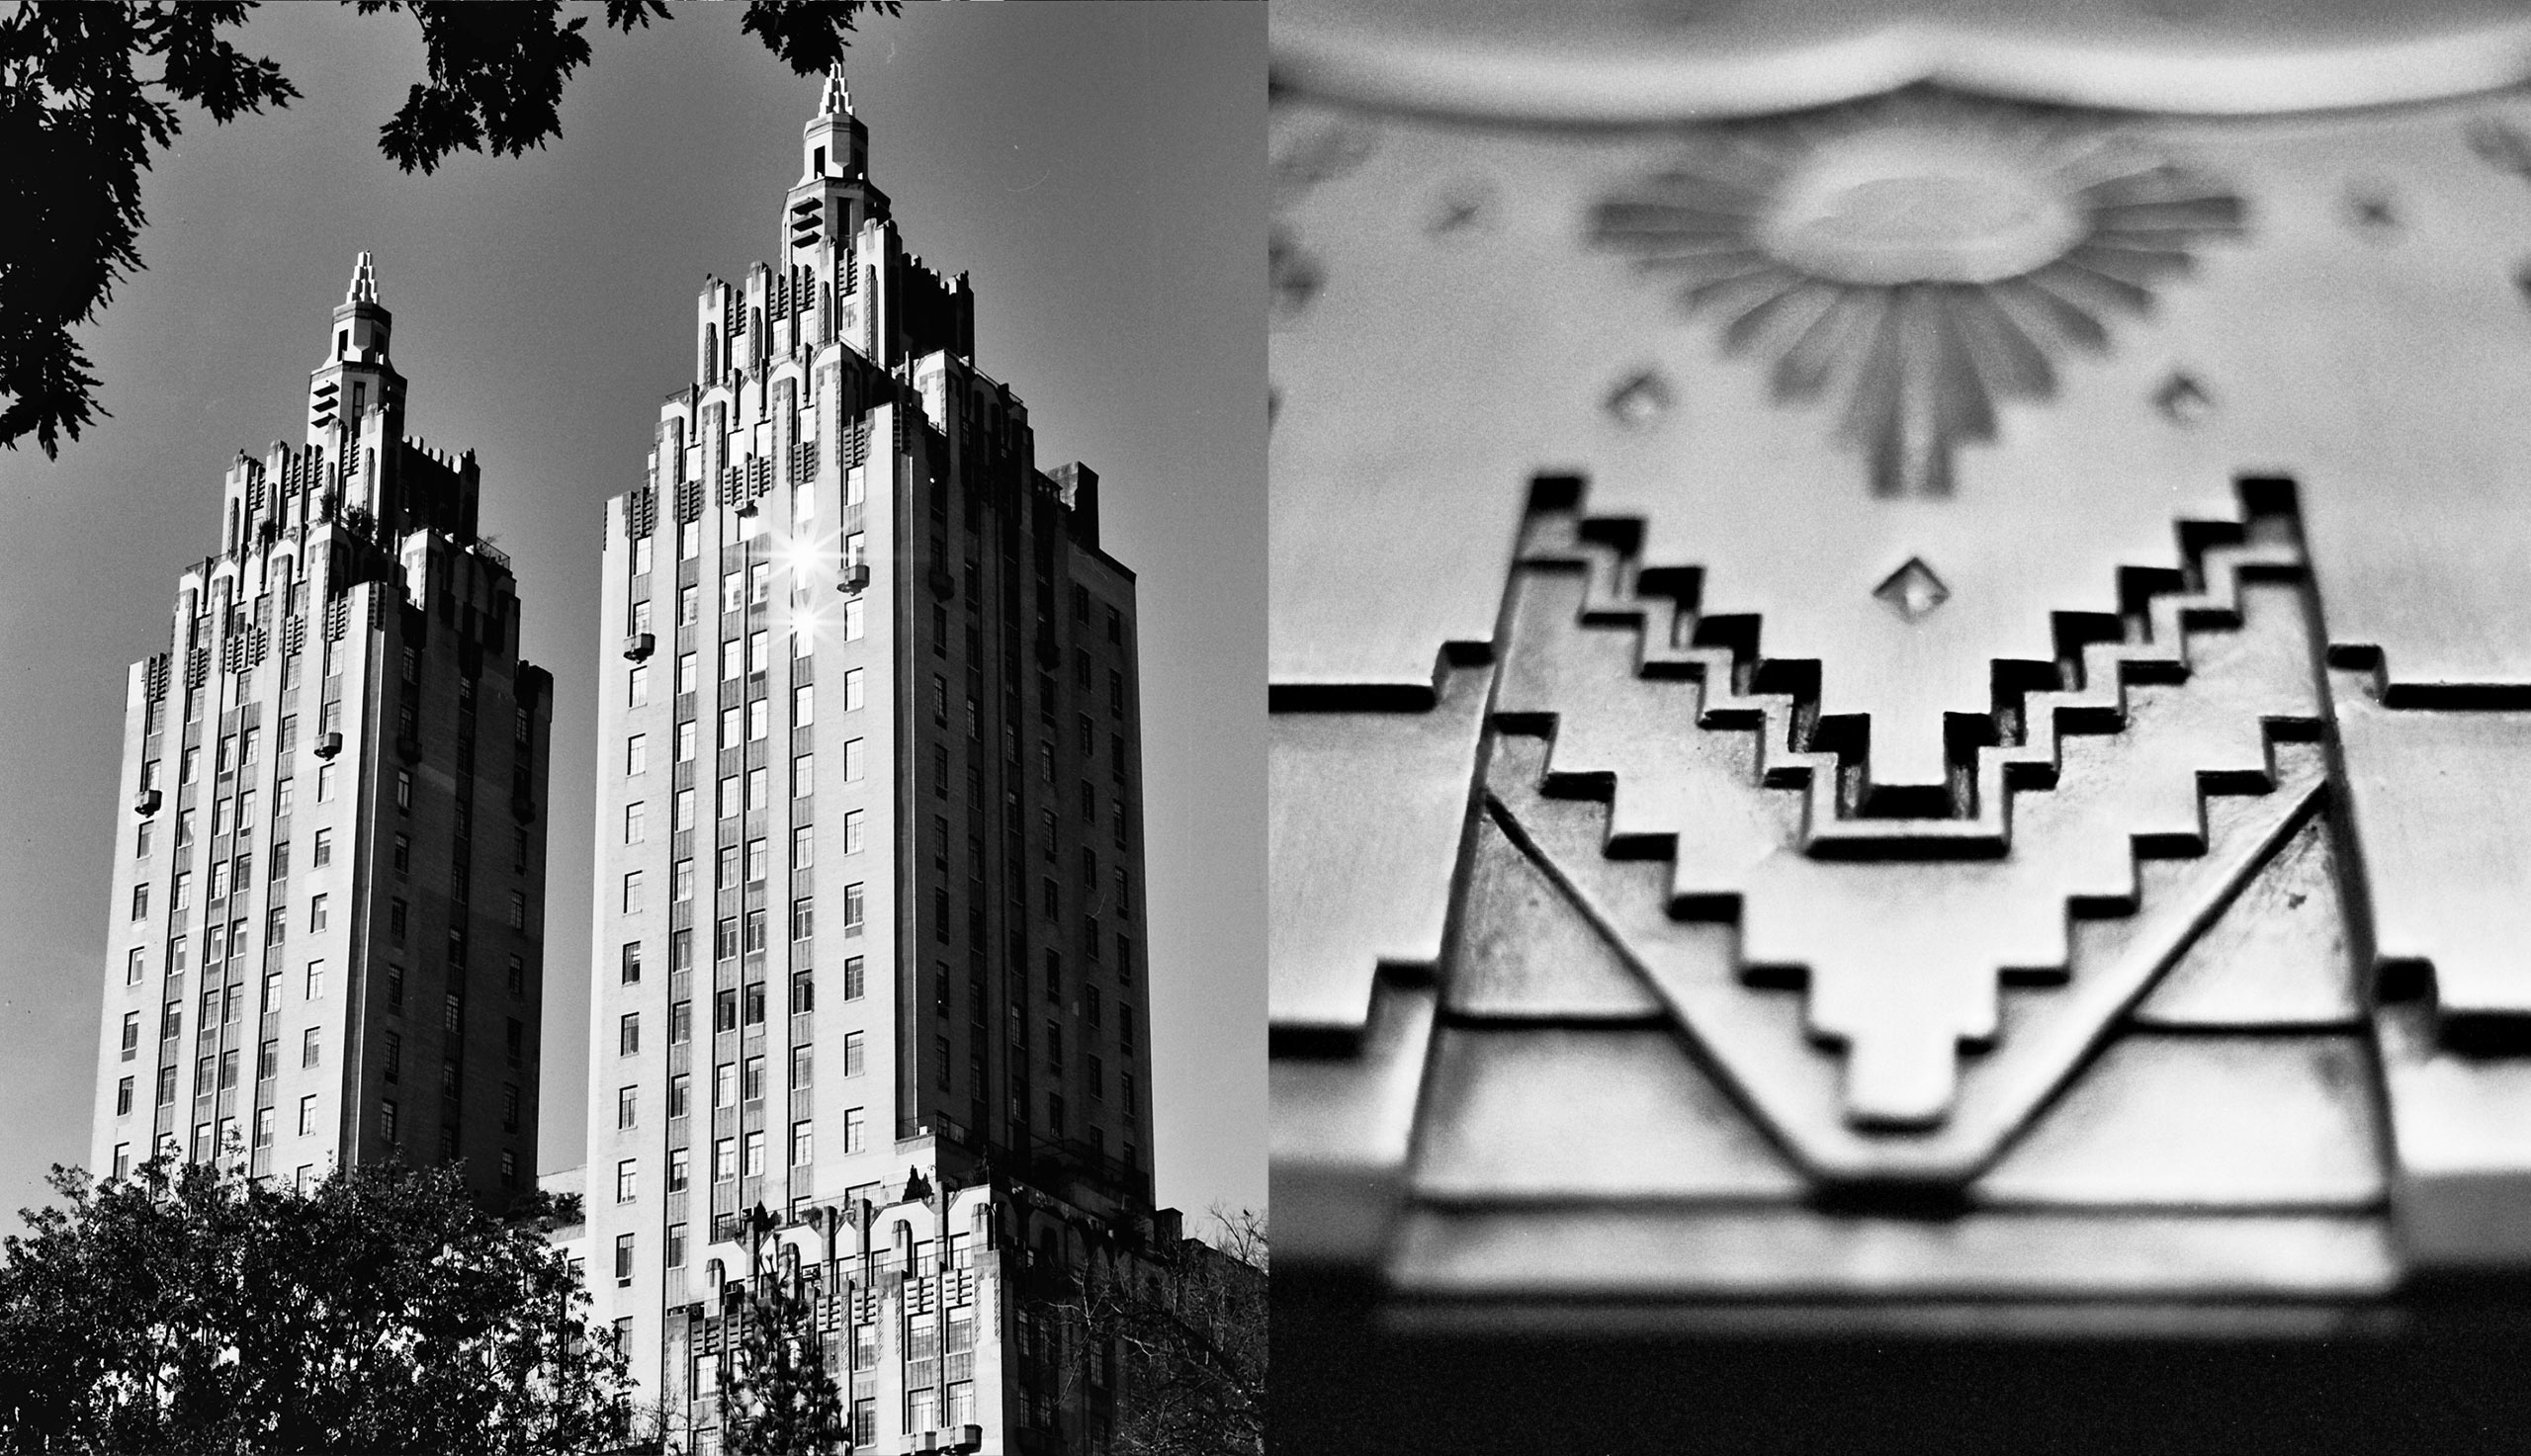 Left: The towers of the El Dorado. Right: a detail from the lobby of 100 Barclay